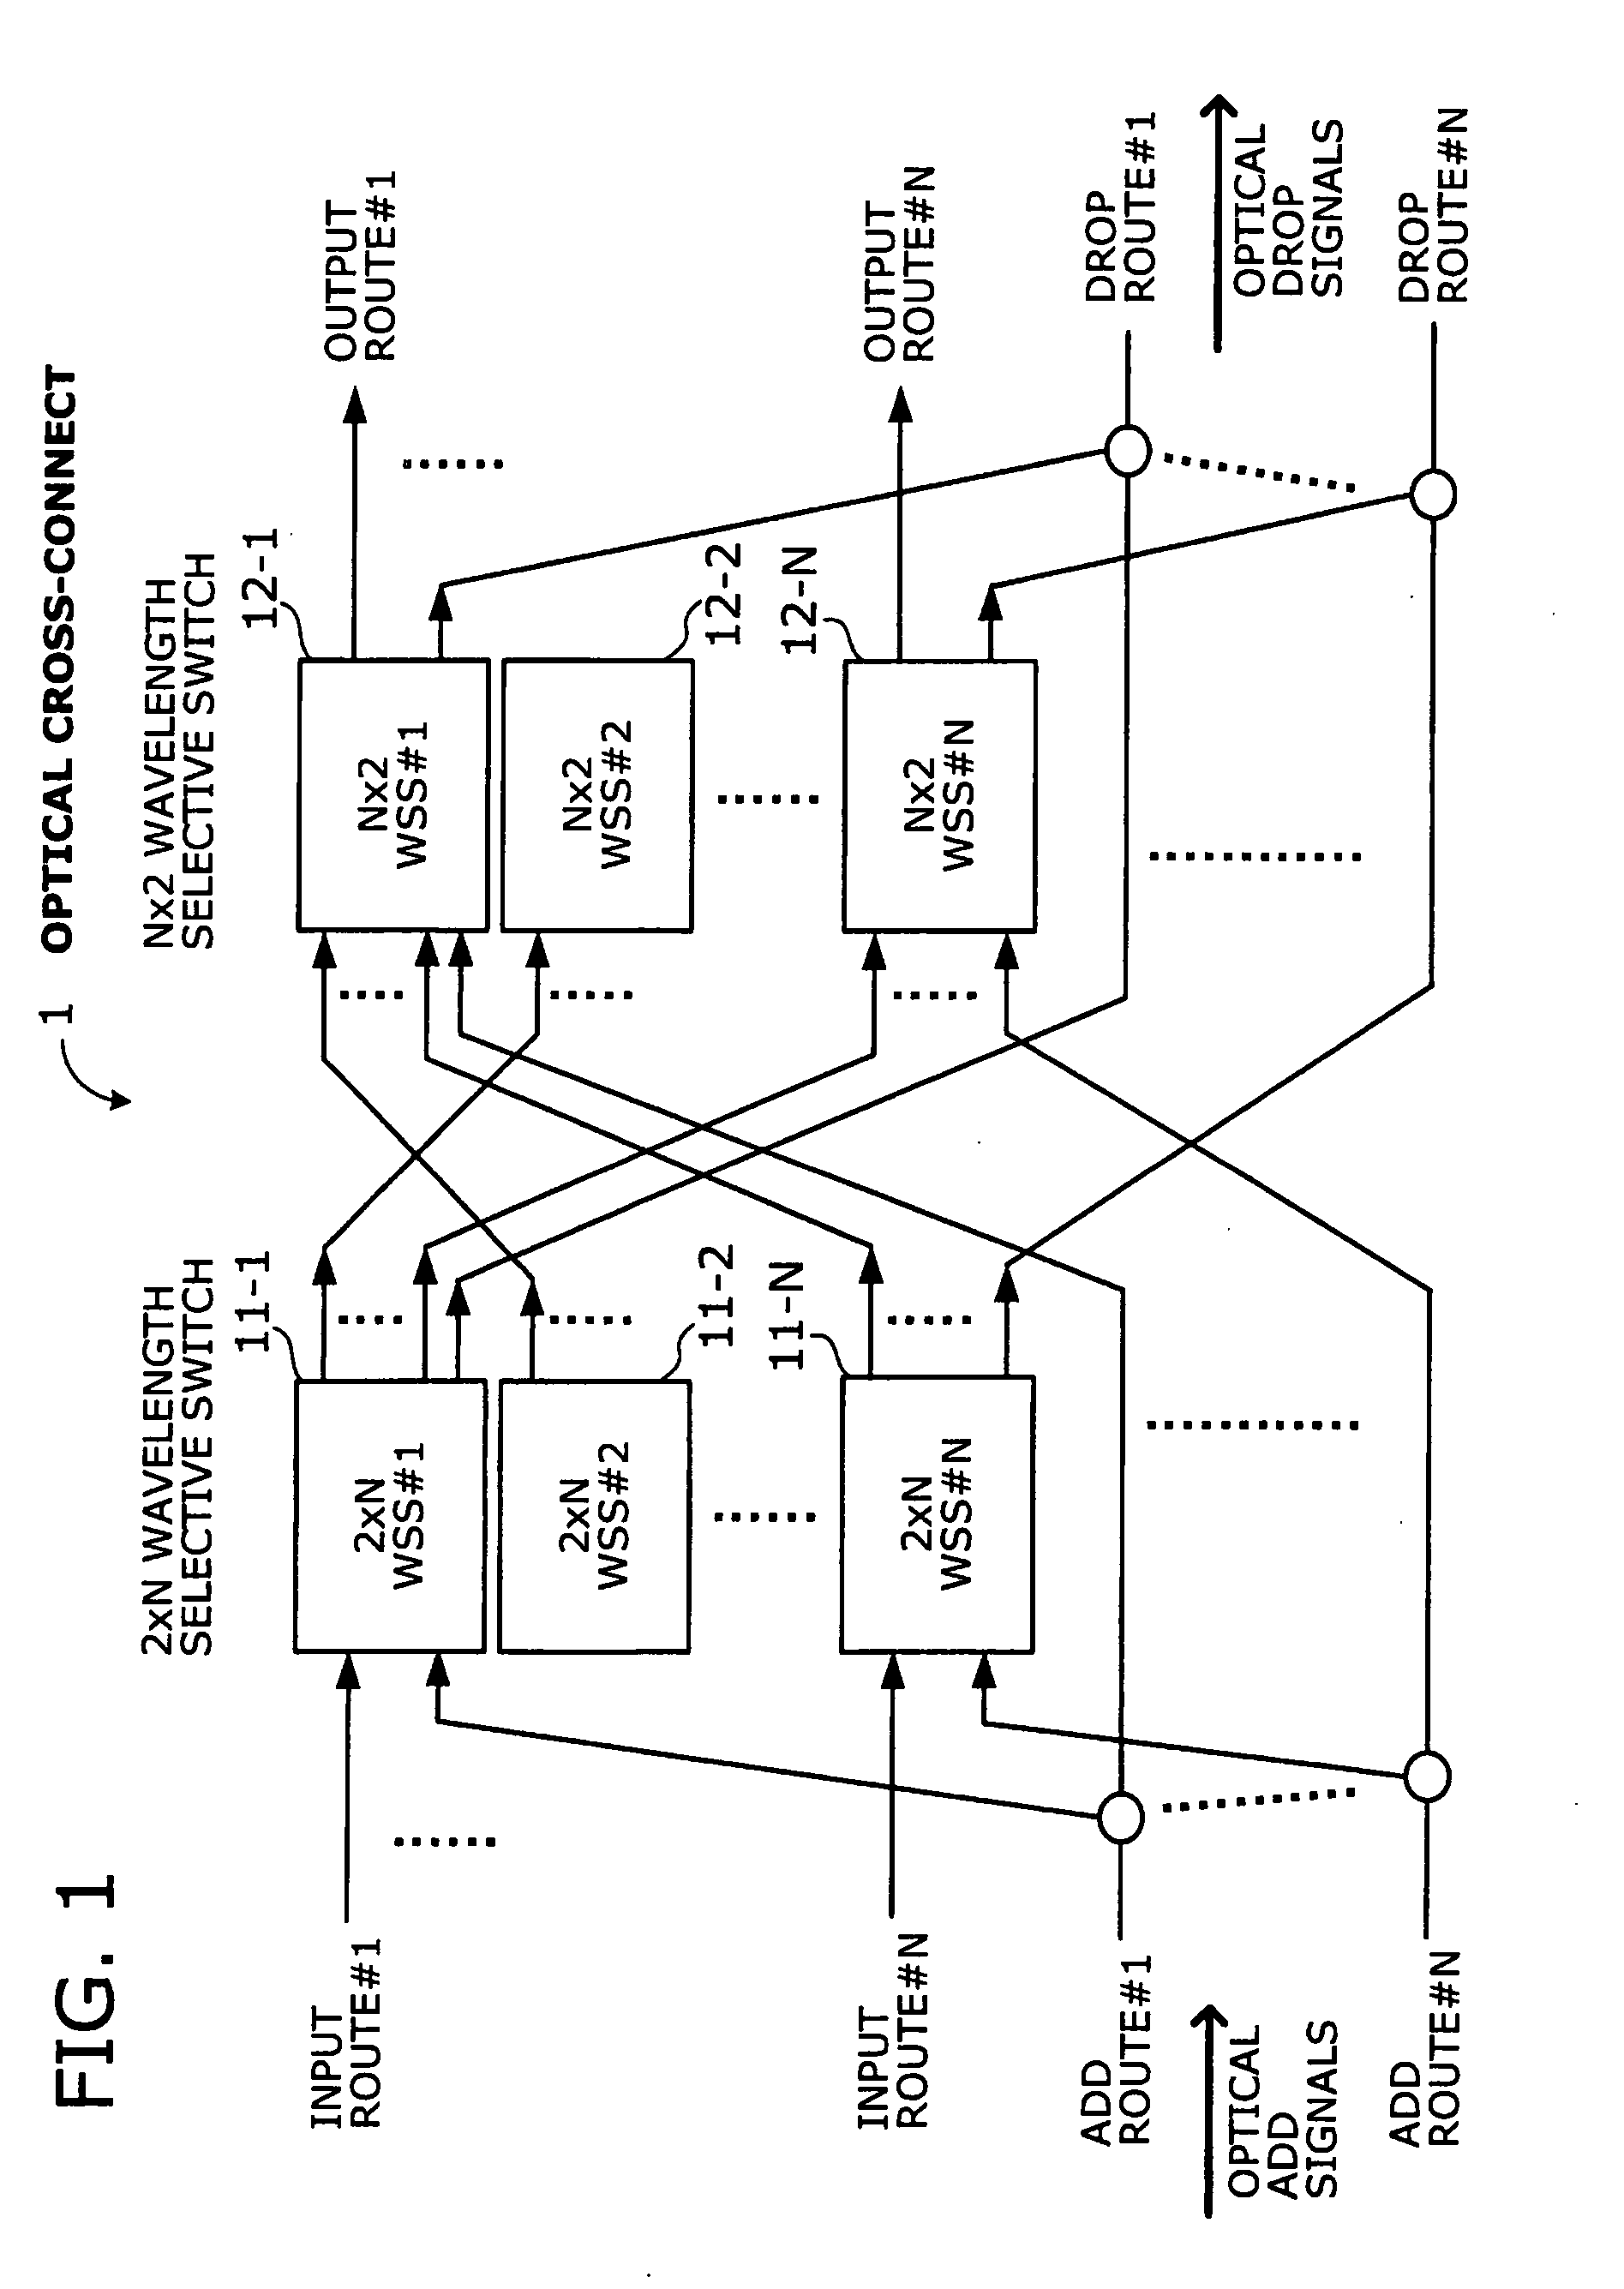 Optical cross-connect using wavelength selective switches